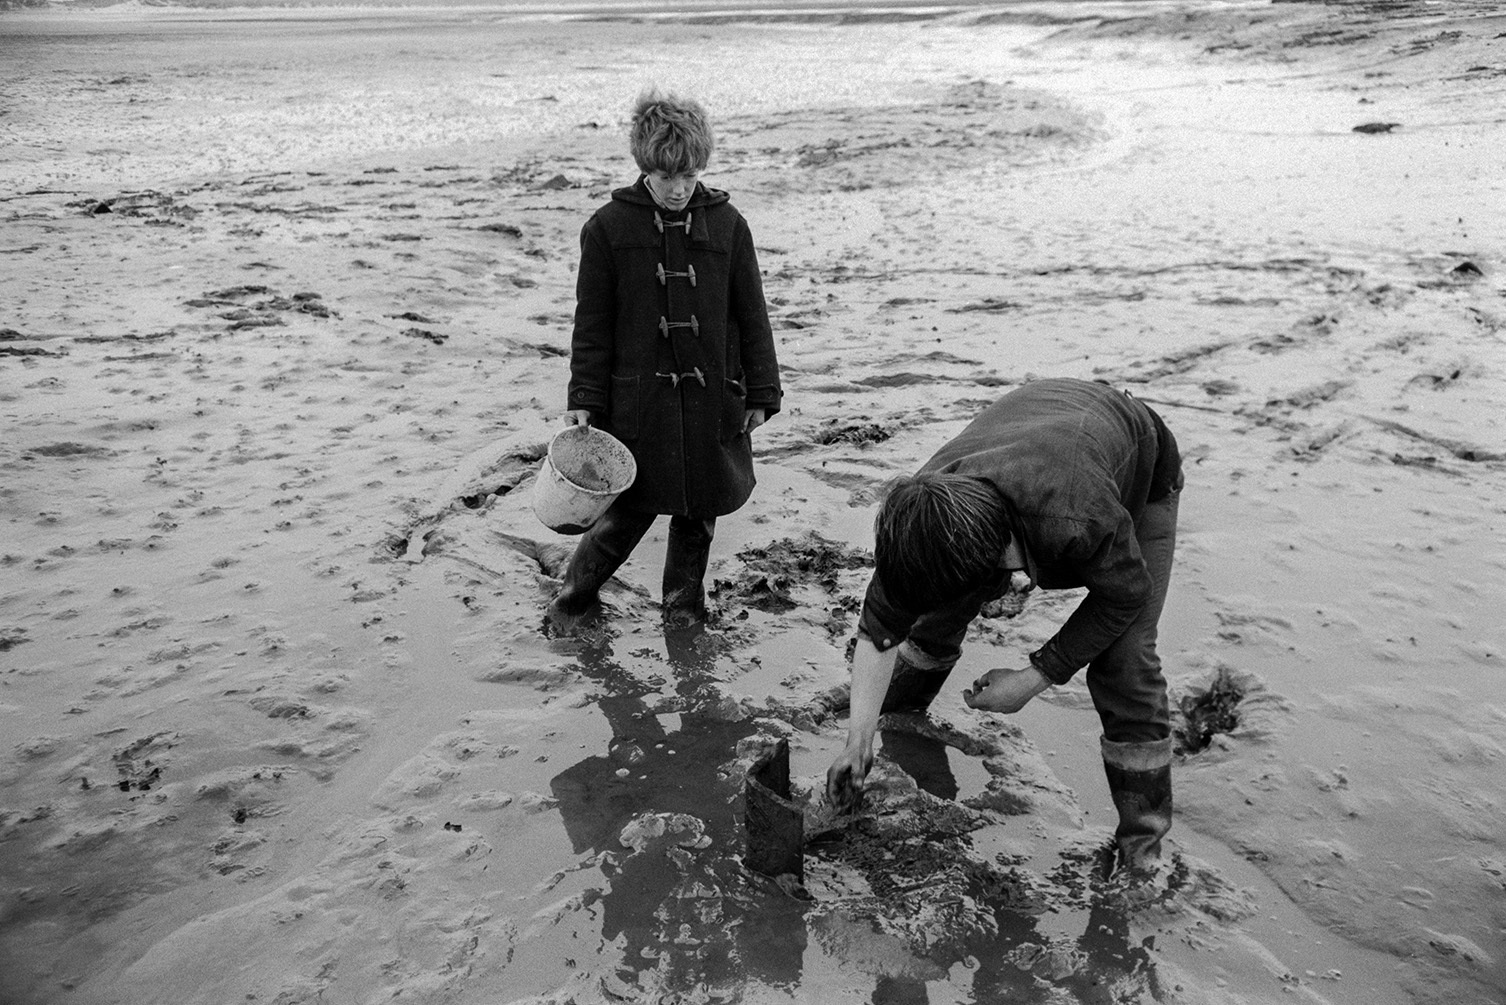 Two boys exploring mud flats on the estuary of the Taw River, possibly near Crow Point, Braunton.